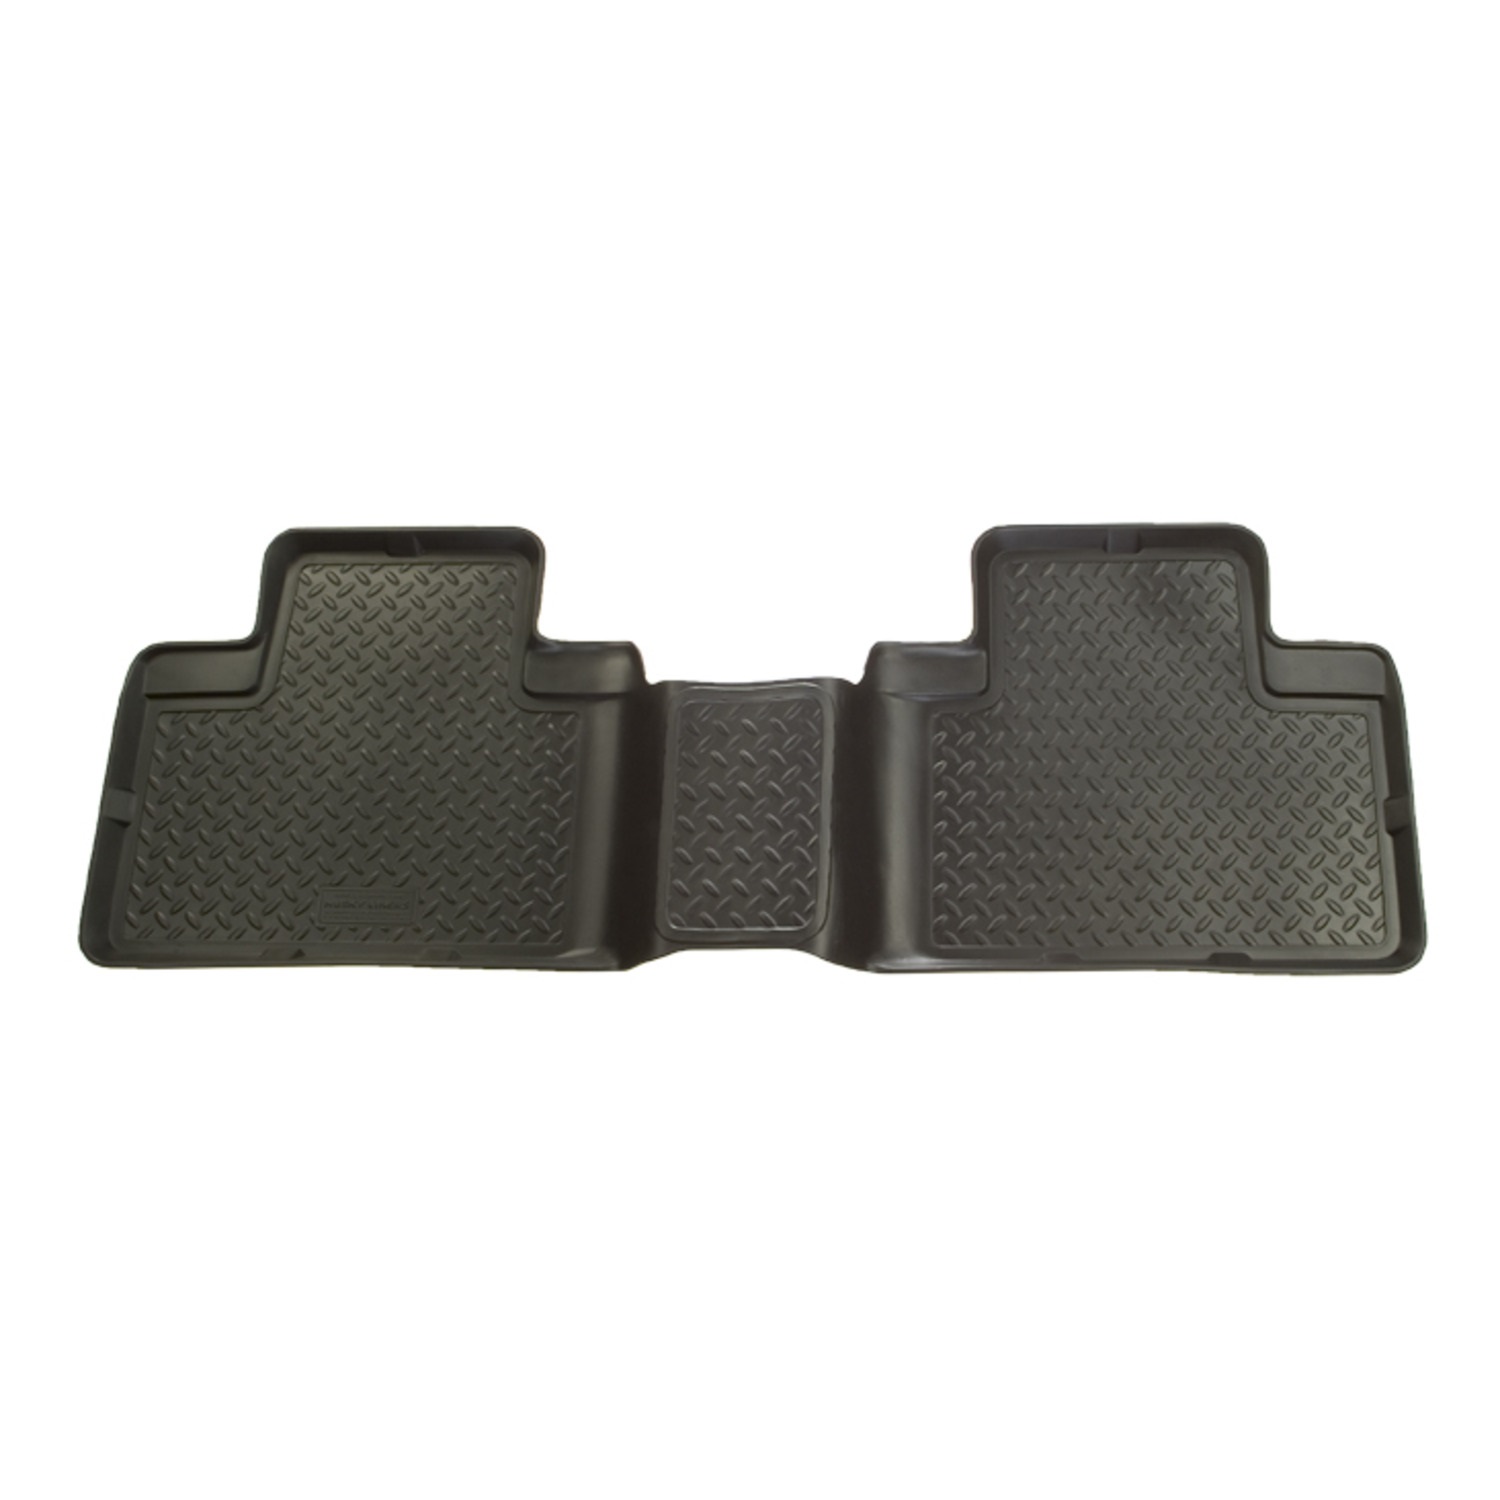 Husky Liners Husky Liners 62511 Classic Style; Floor Liner Fits Canyon Colorado i-350 i-370